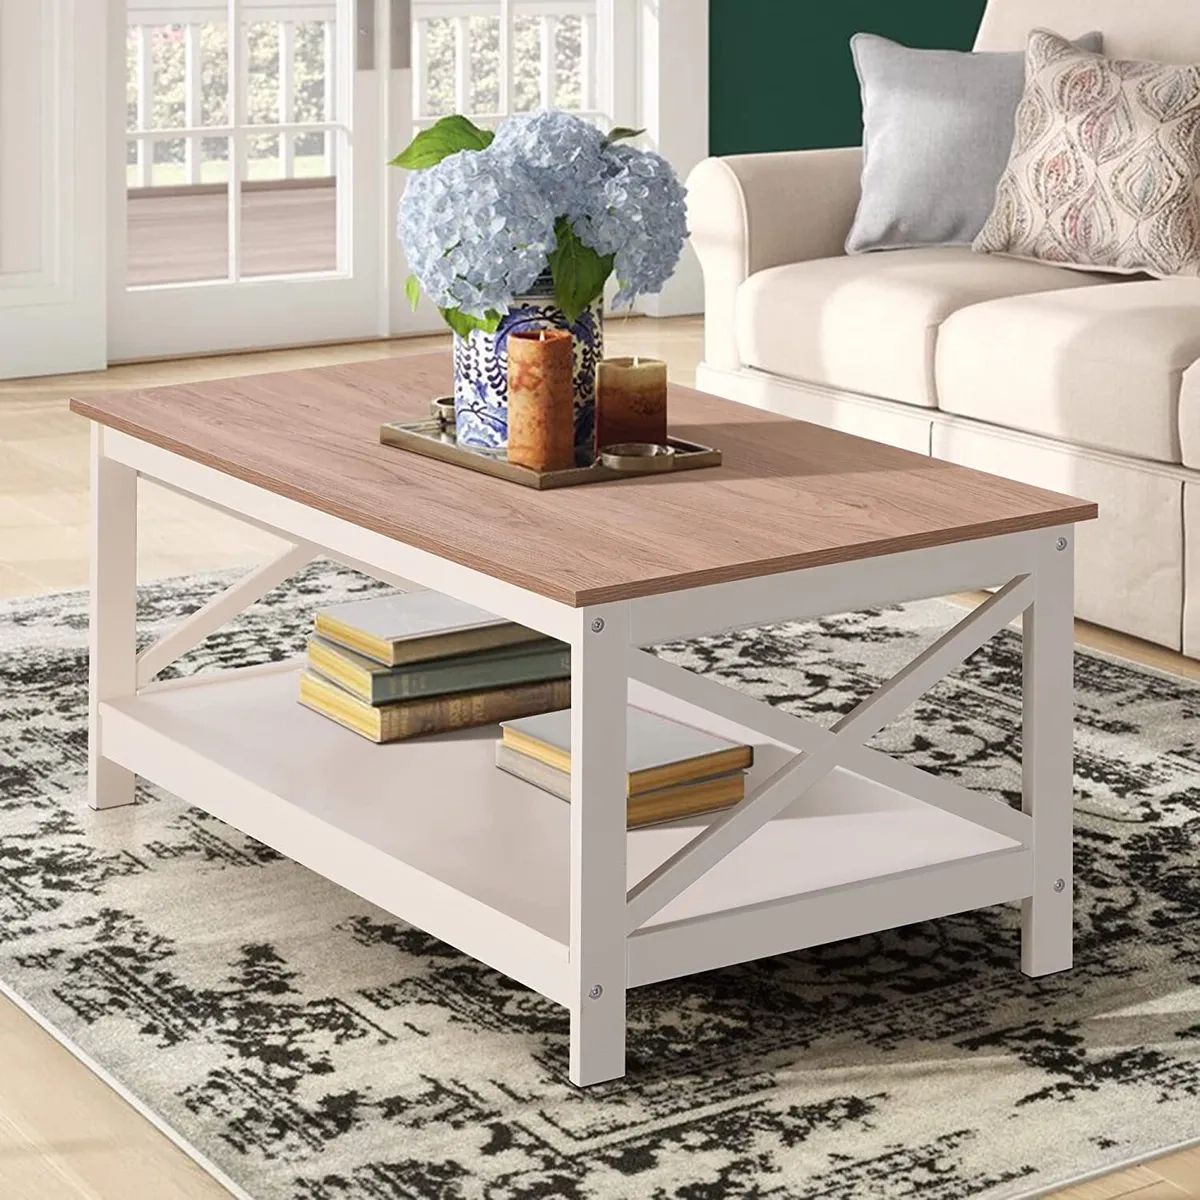 X Shape Design Coffee Table Modern Rustic Coffee Table W/ Storage Shelf 2  Tiers | Ebay Intended For Modern Wooden X Design Coffee Tables (Photo 4 of 15)